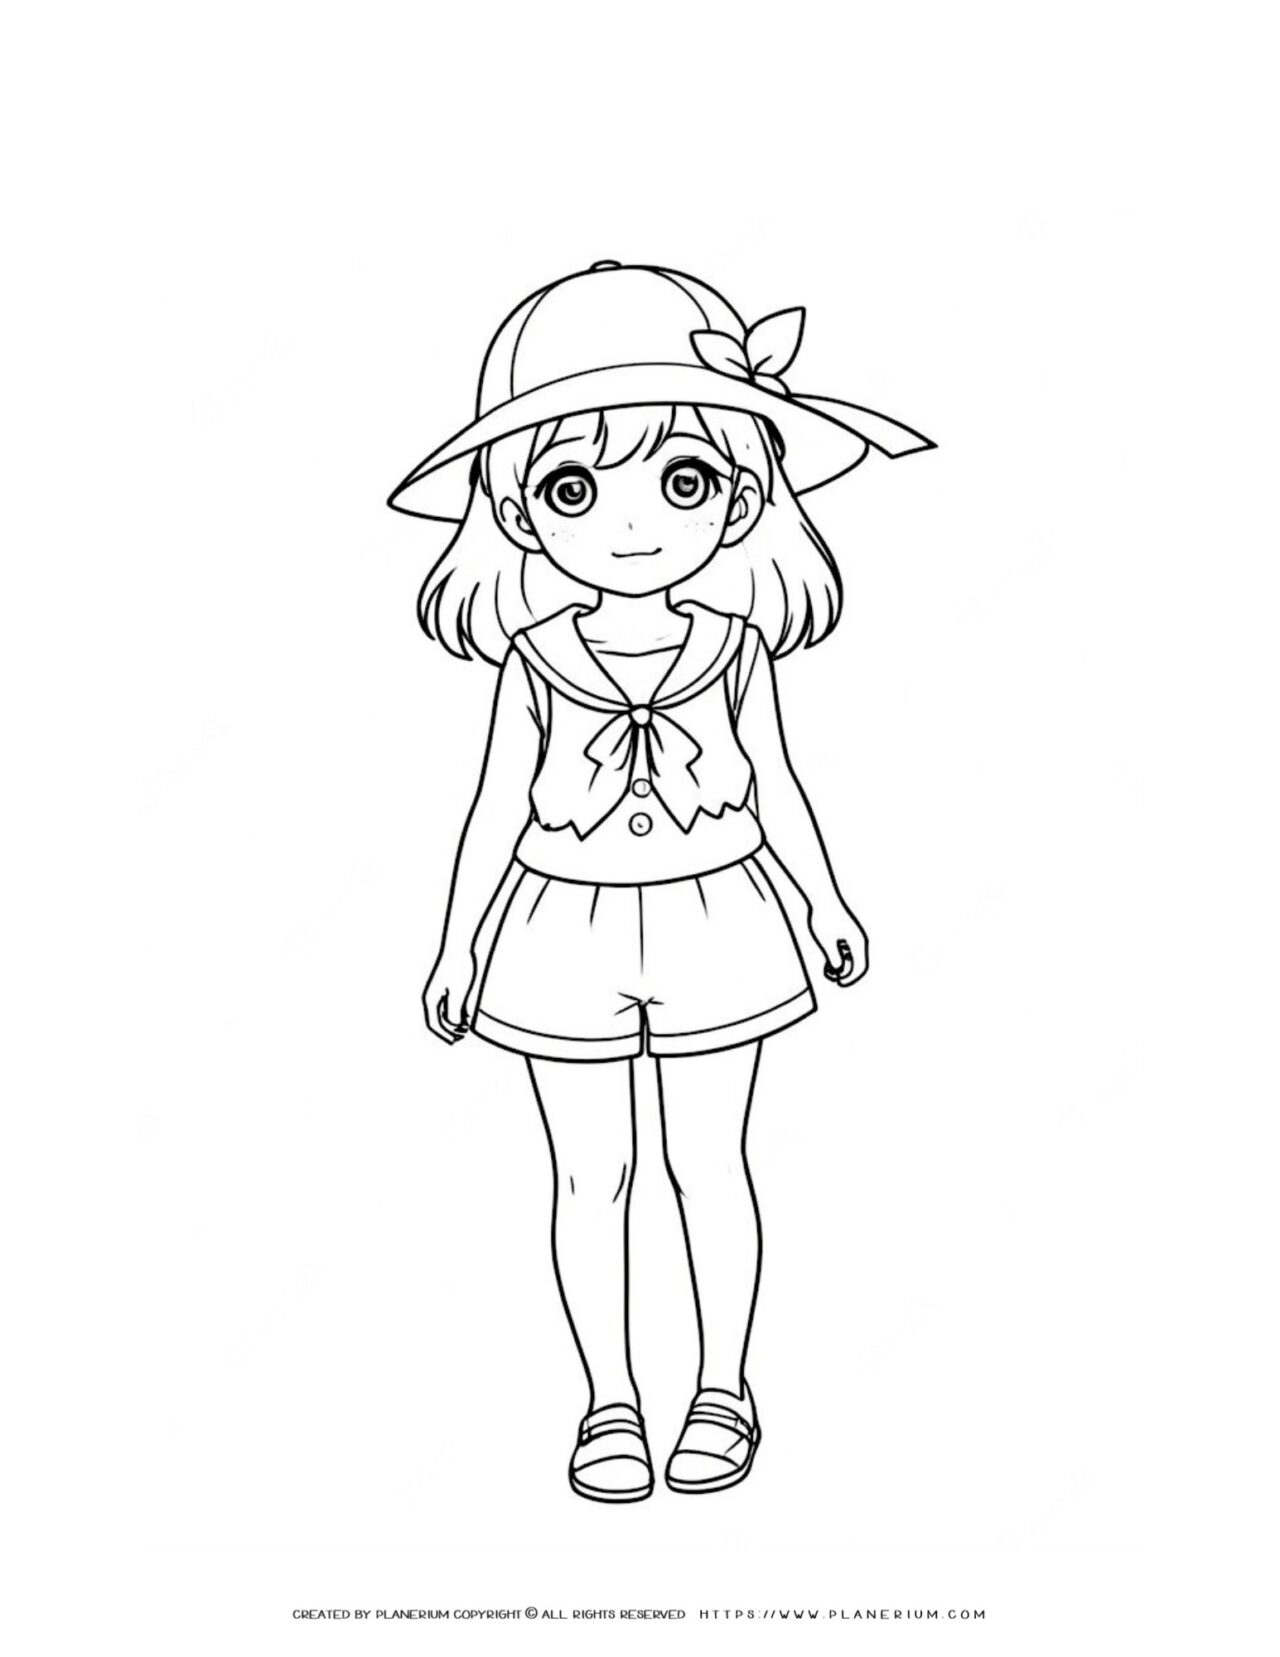 happy-girl-with-hat-standing-summer-cloths-coloring-page-for-kids